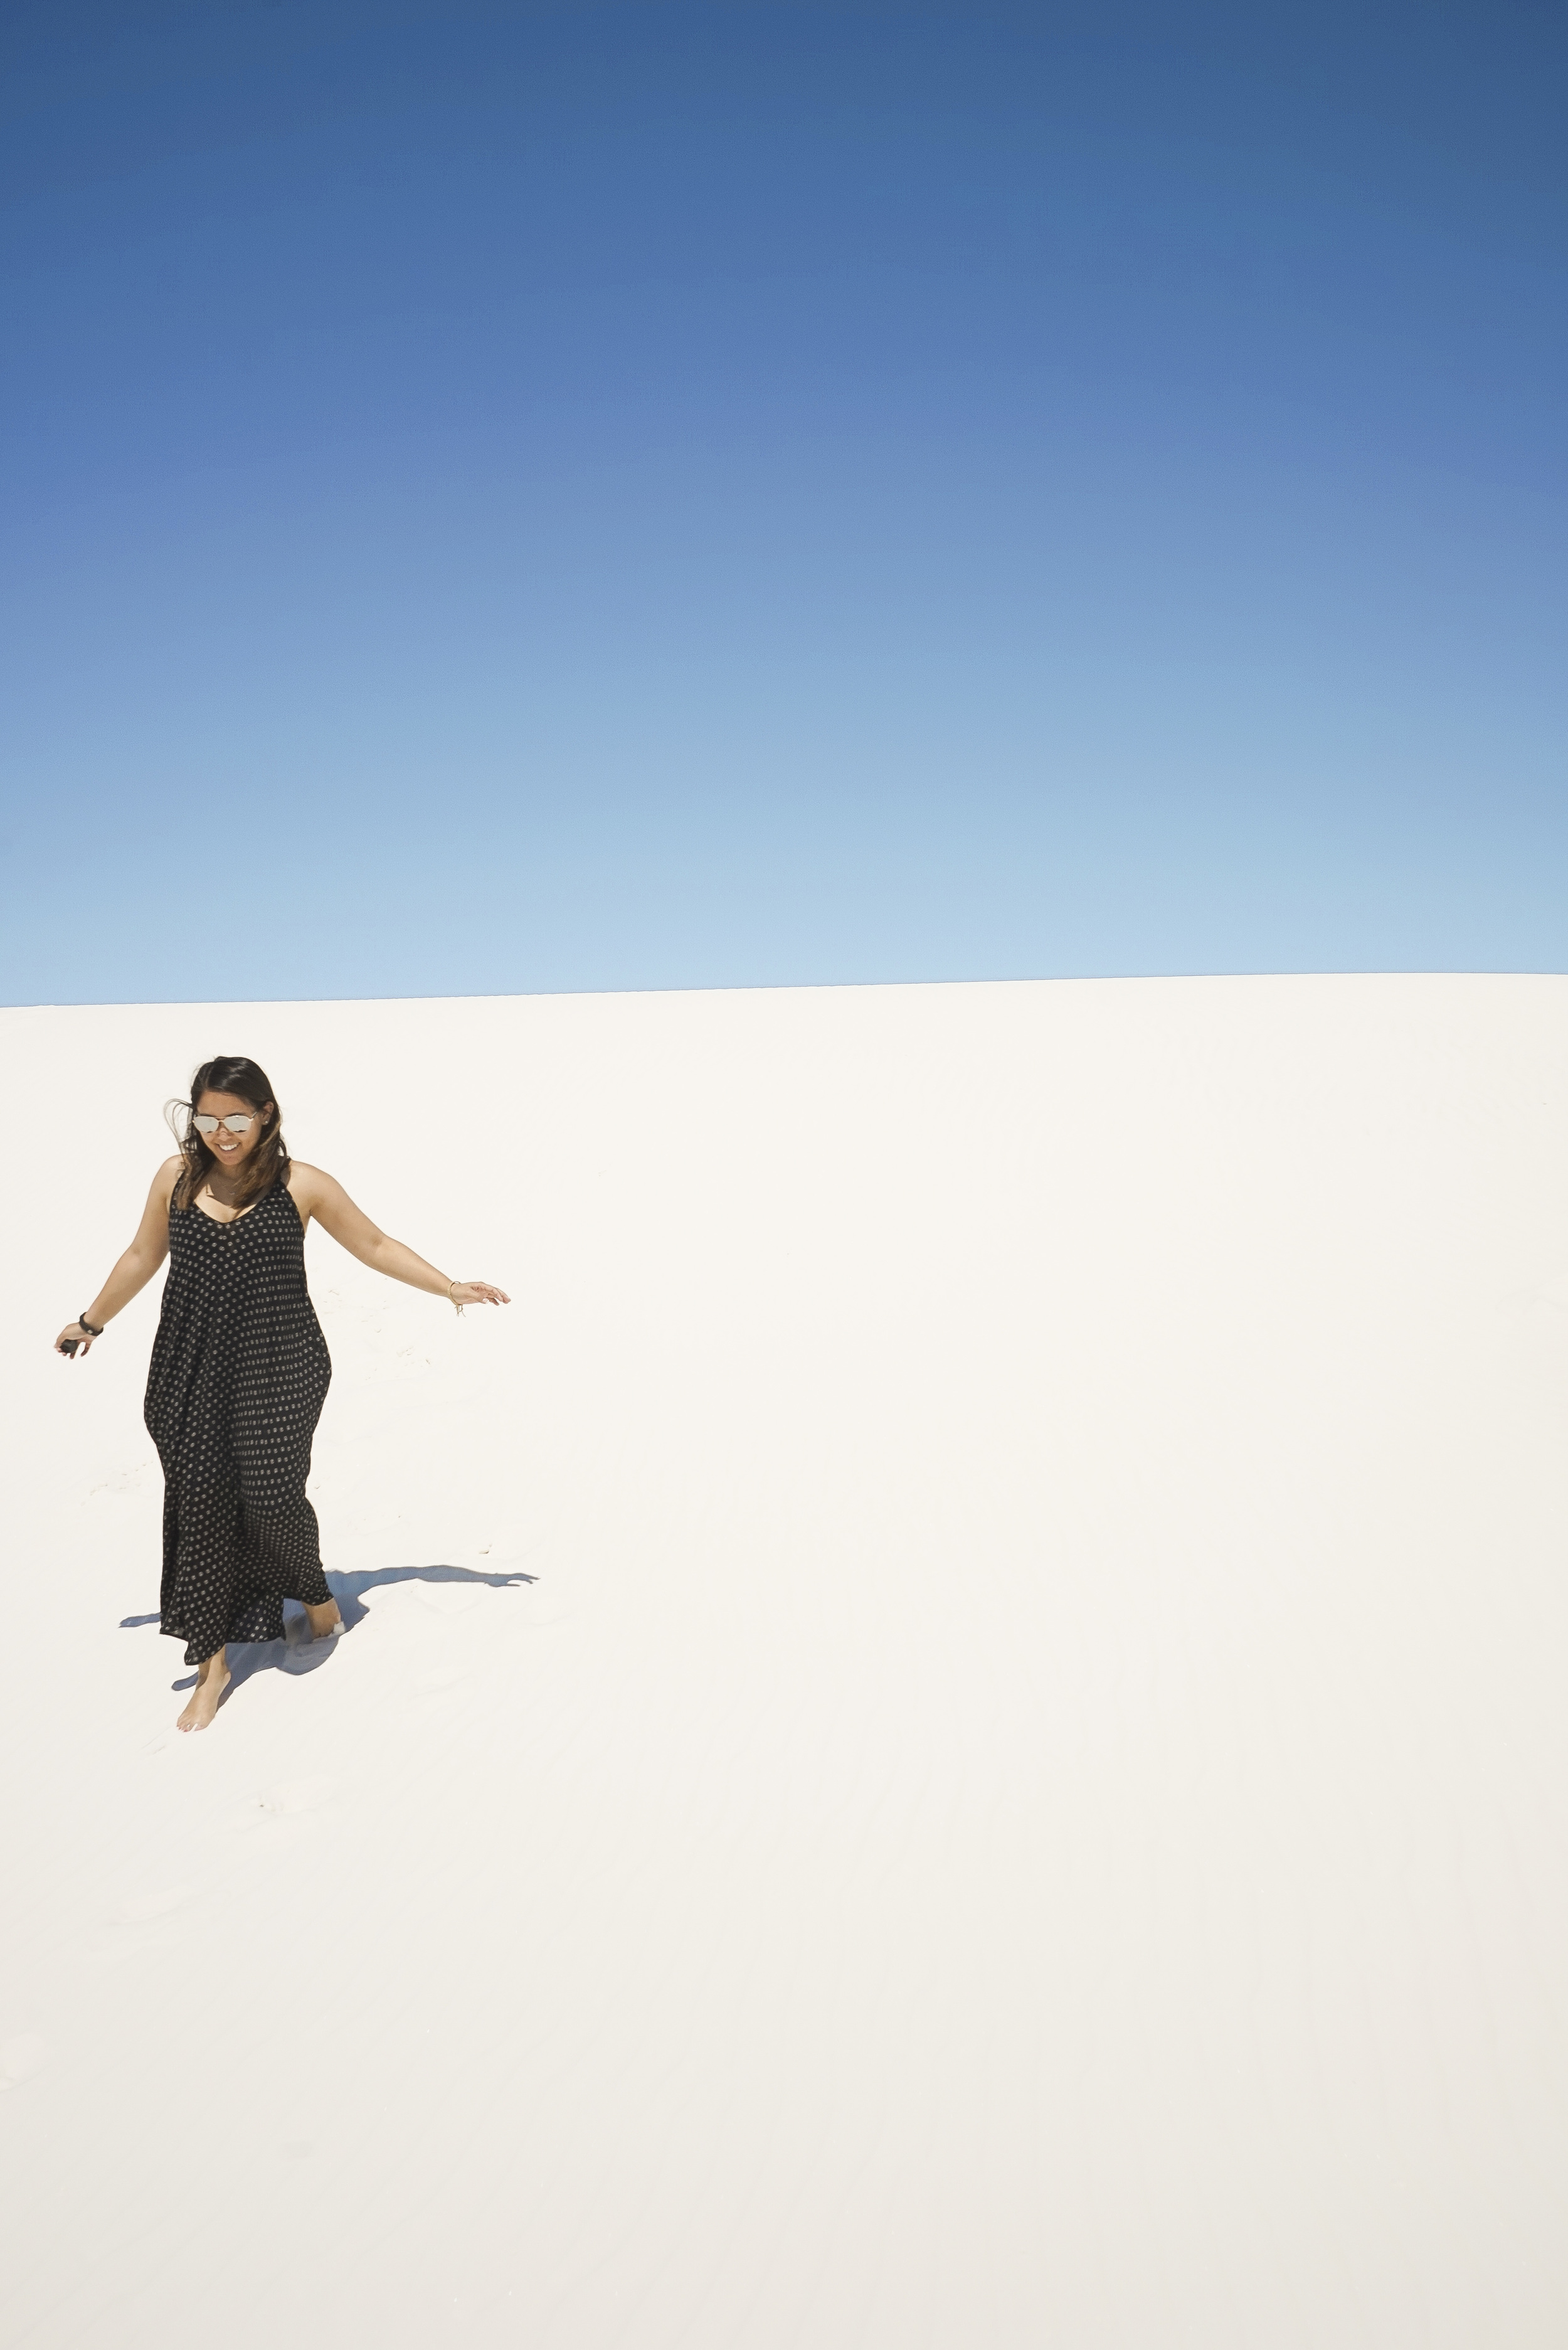 White Sands National Monument - Shannon Did What?